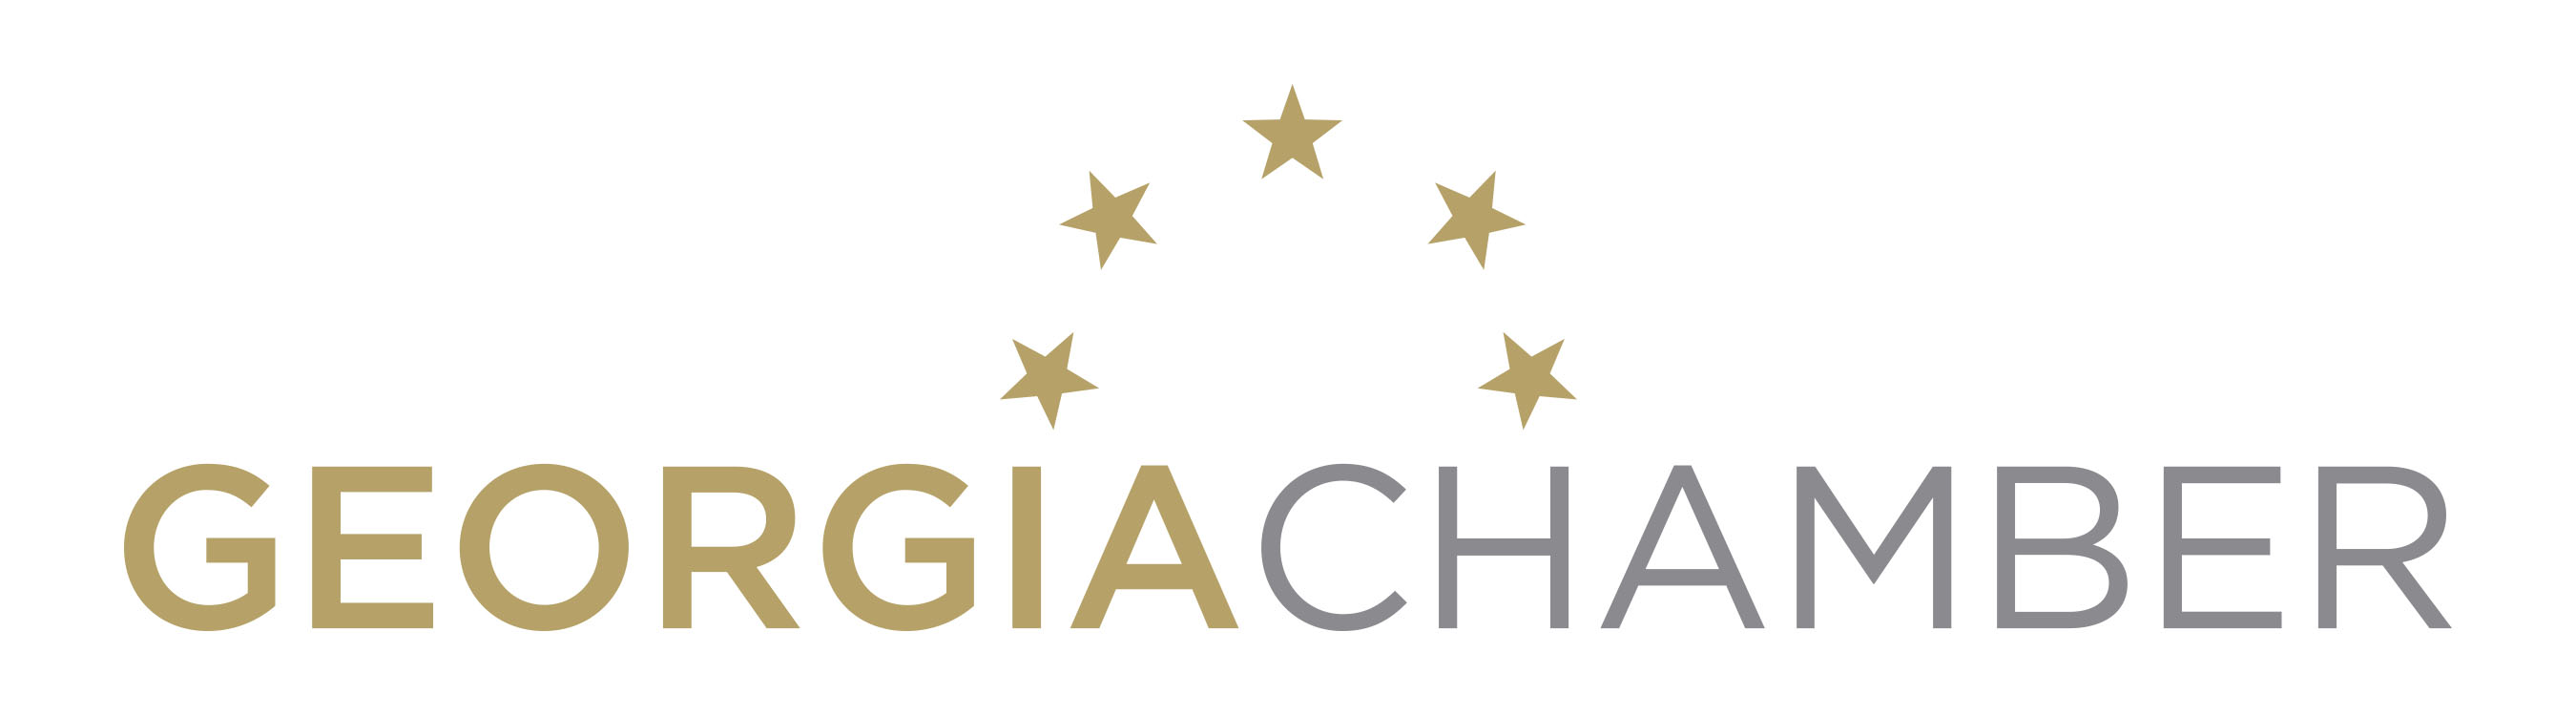 Jobs at georgia chamber of commerce